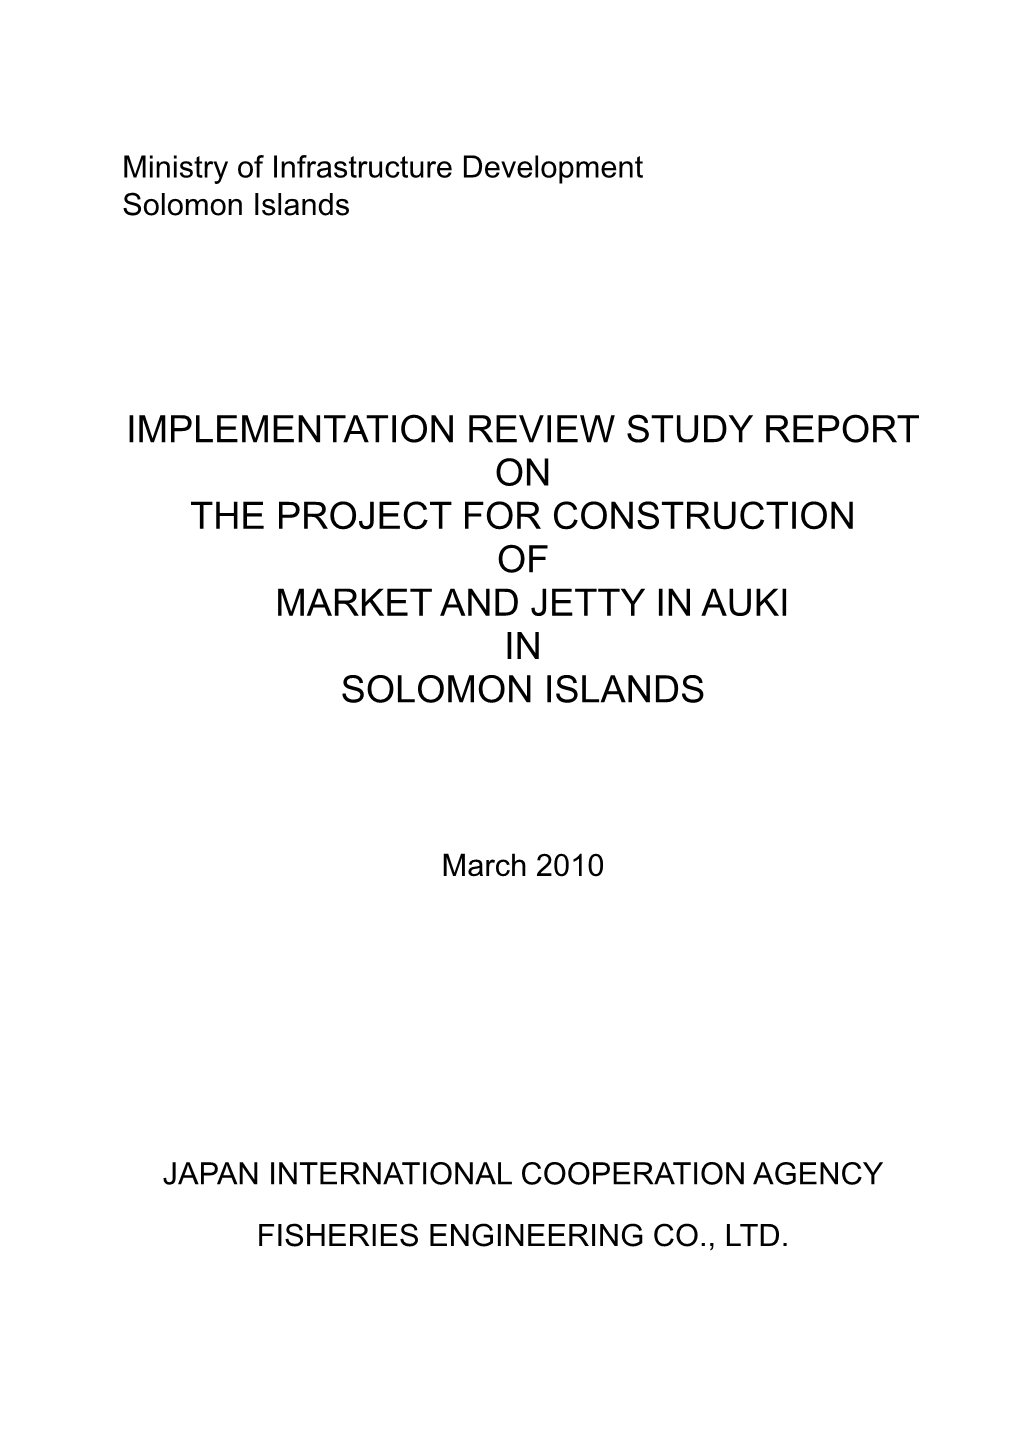 Implementation Review Study Report on the Project for Construction of Market and Jetty in Auki in Solomon Islands